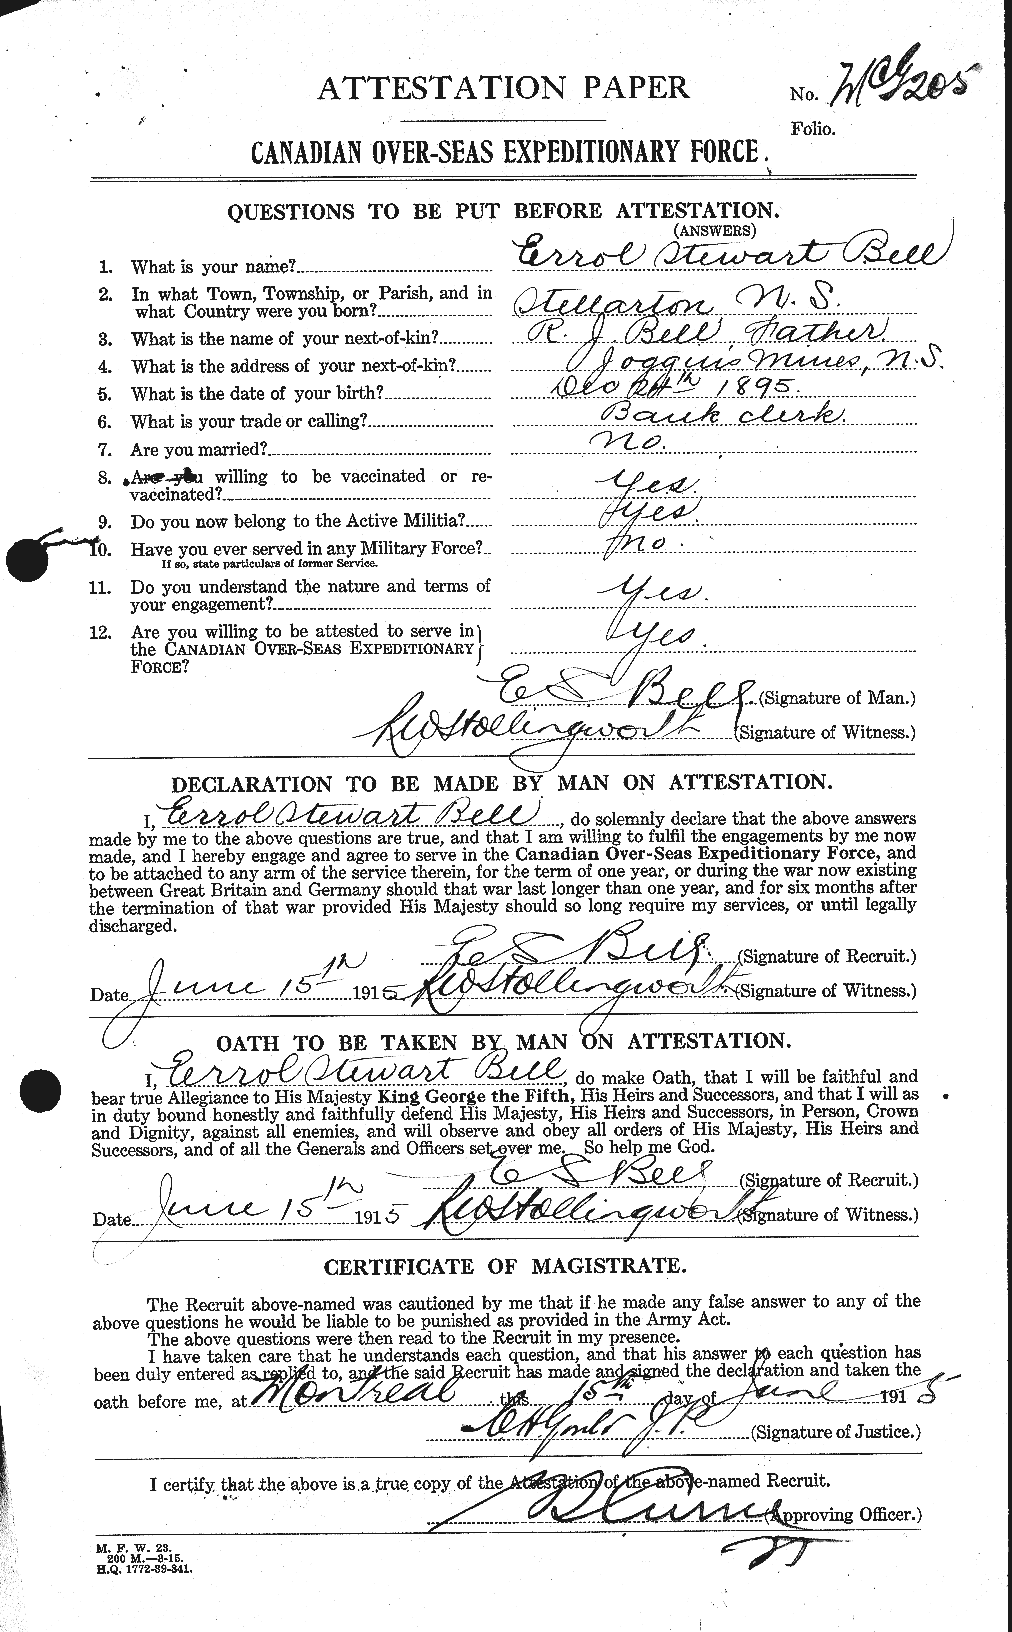 Personnel Records of the First World War - CEF 234077a